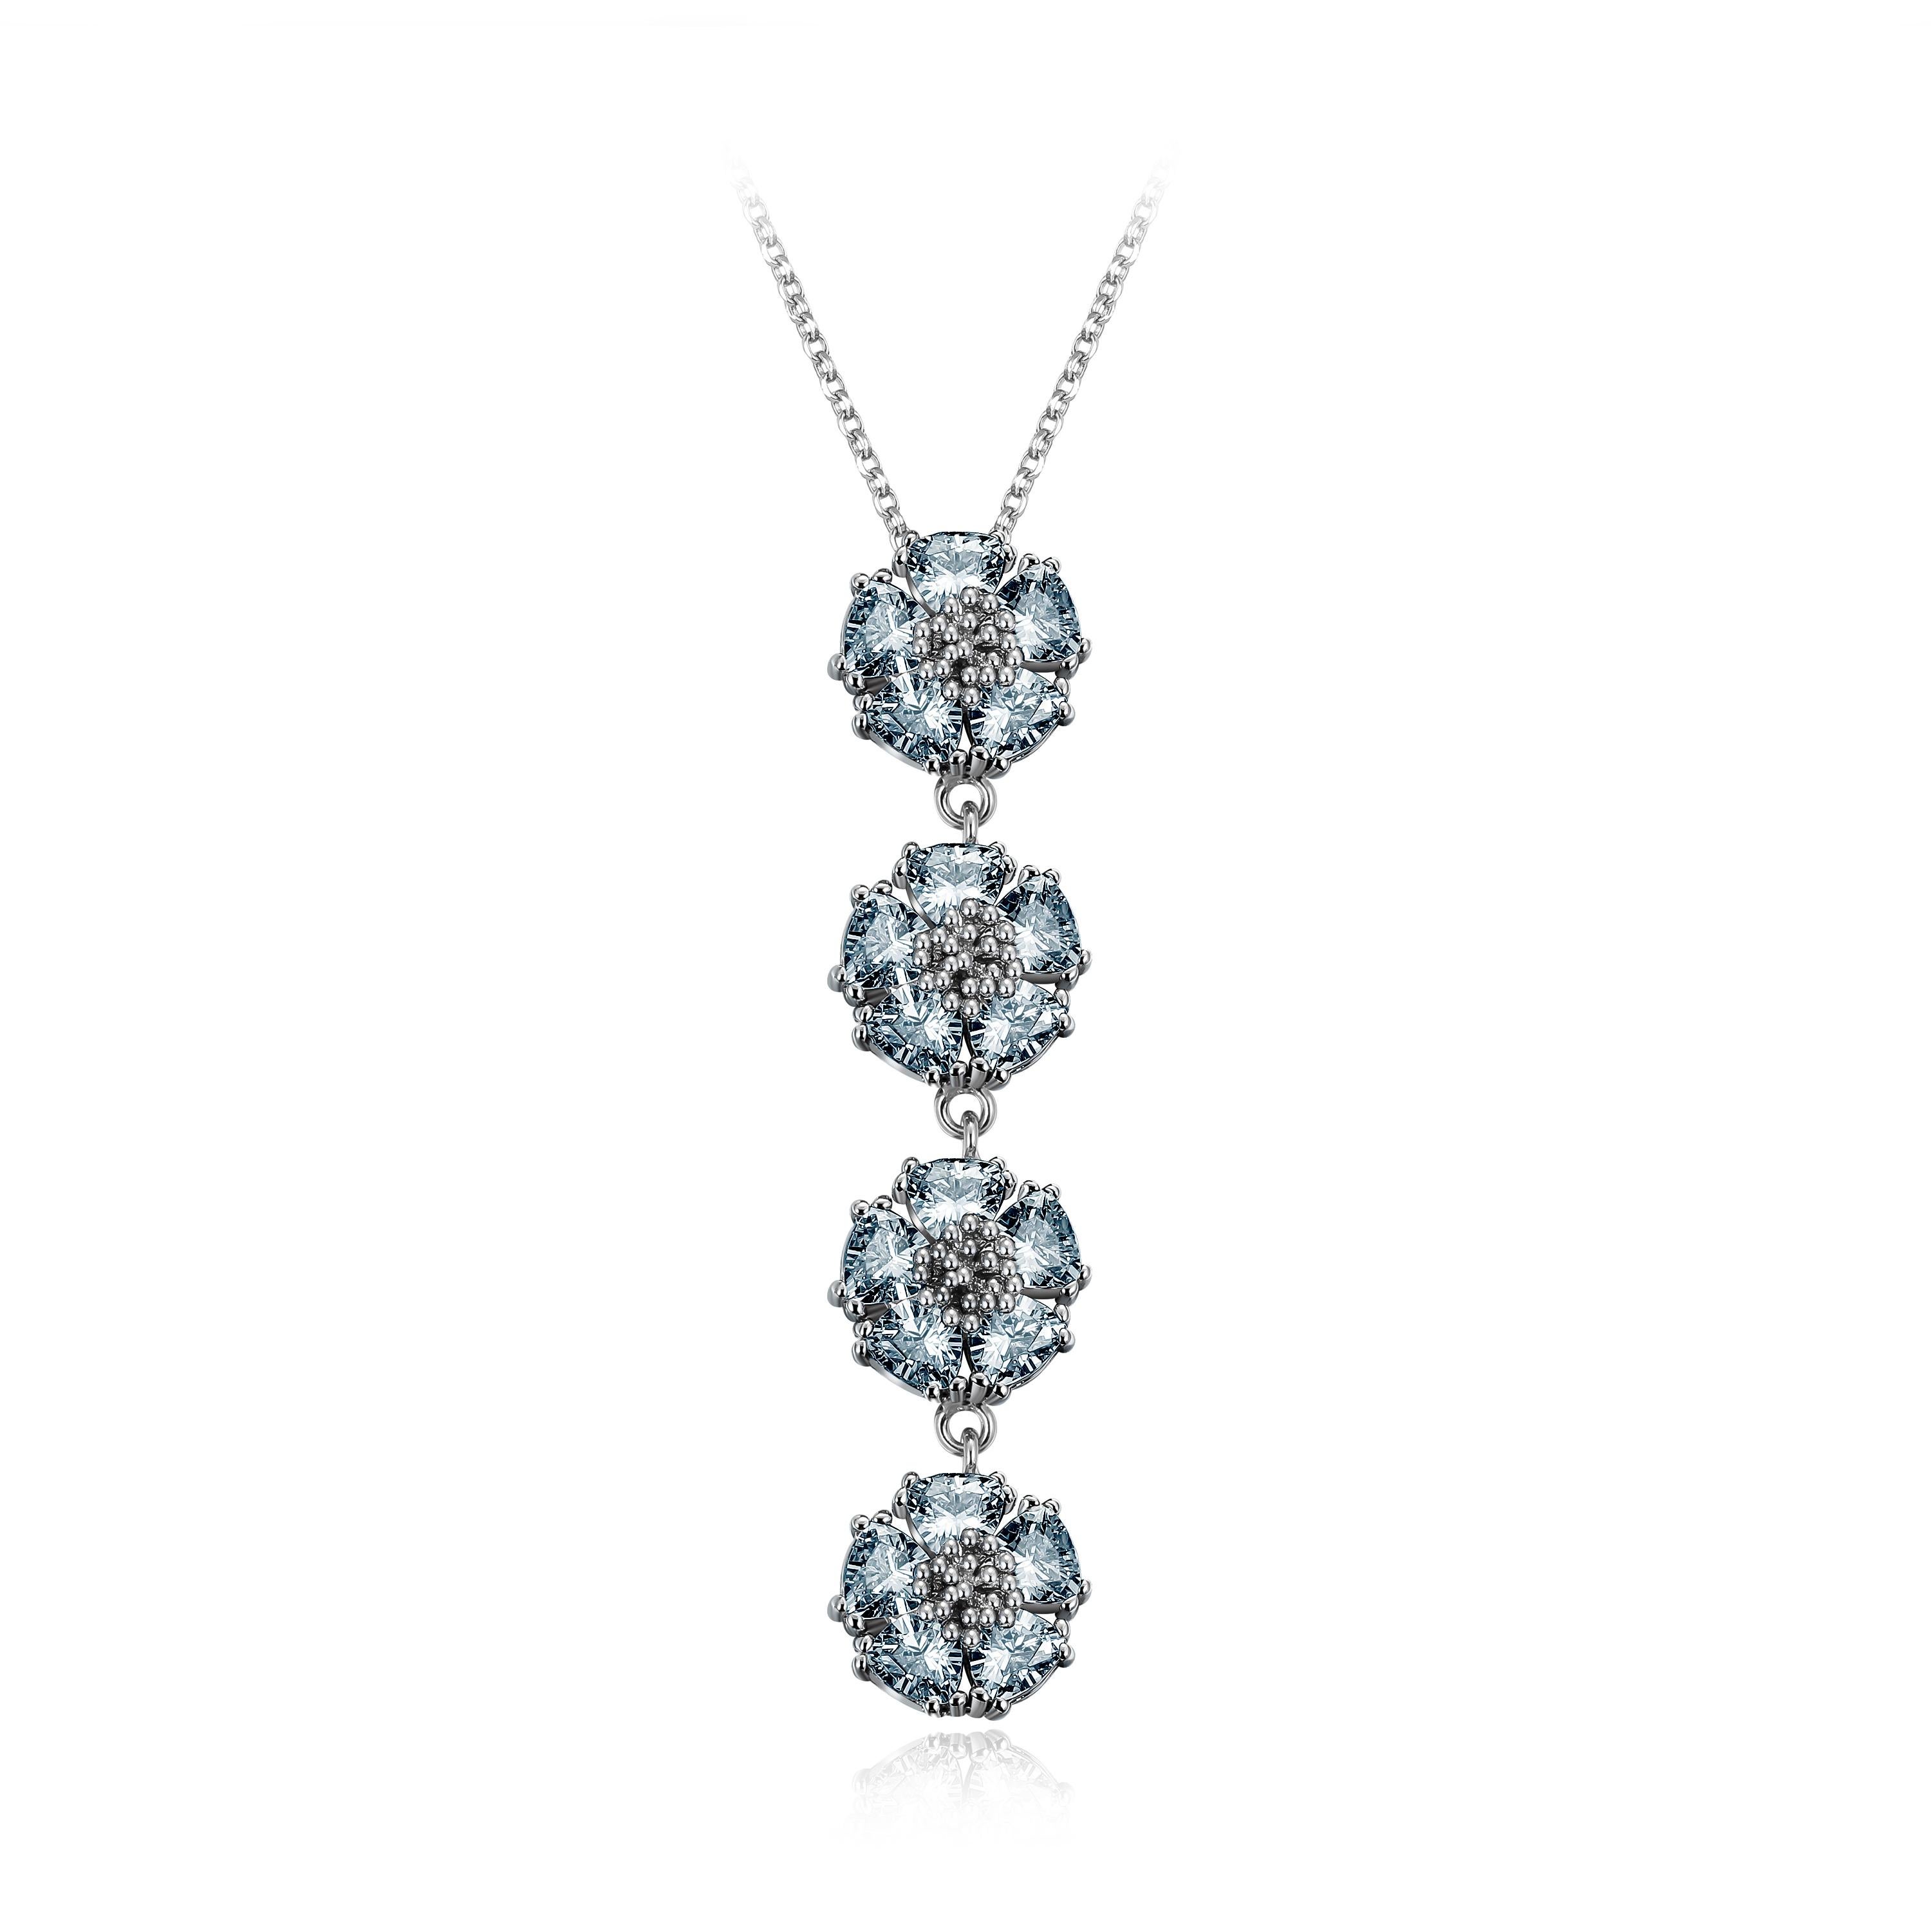 Designed in NYC

.925 Sterling Silver 4 x 10 mm Dark Blue Topaz Quadruple Vertical Blossom Gentile Necklace. No matter the season, allow natural beauty to surround you wherever you go. Quadruple vertical  blossom gentile necklace: 

Sterling silver